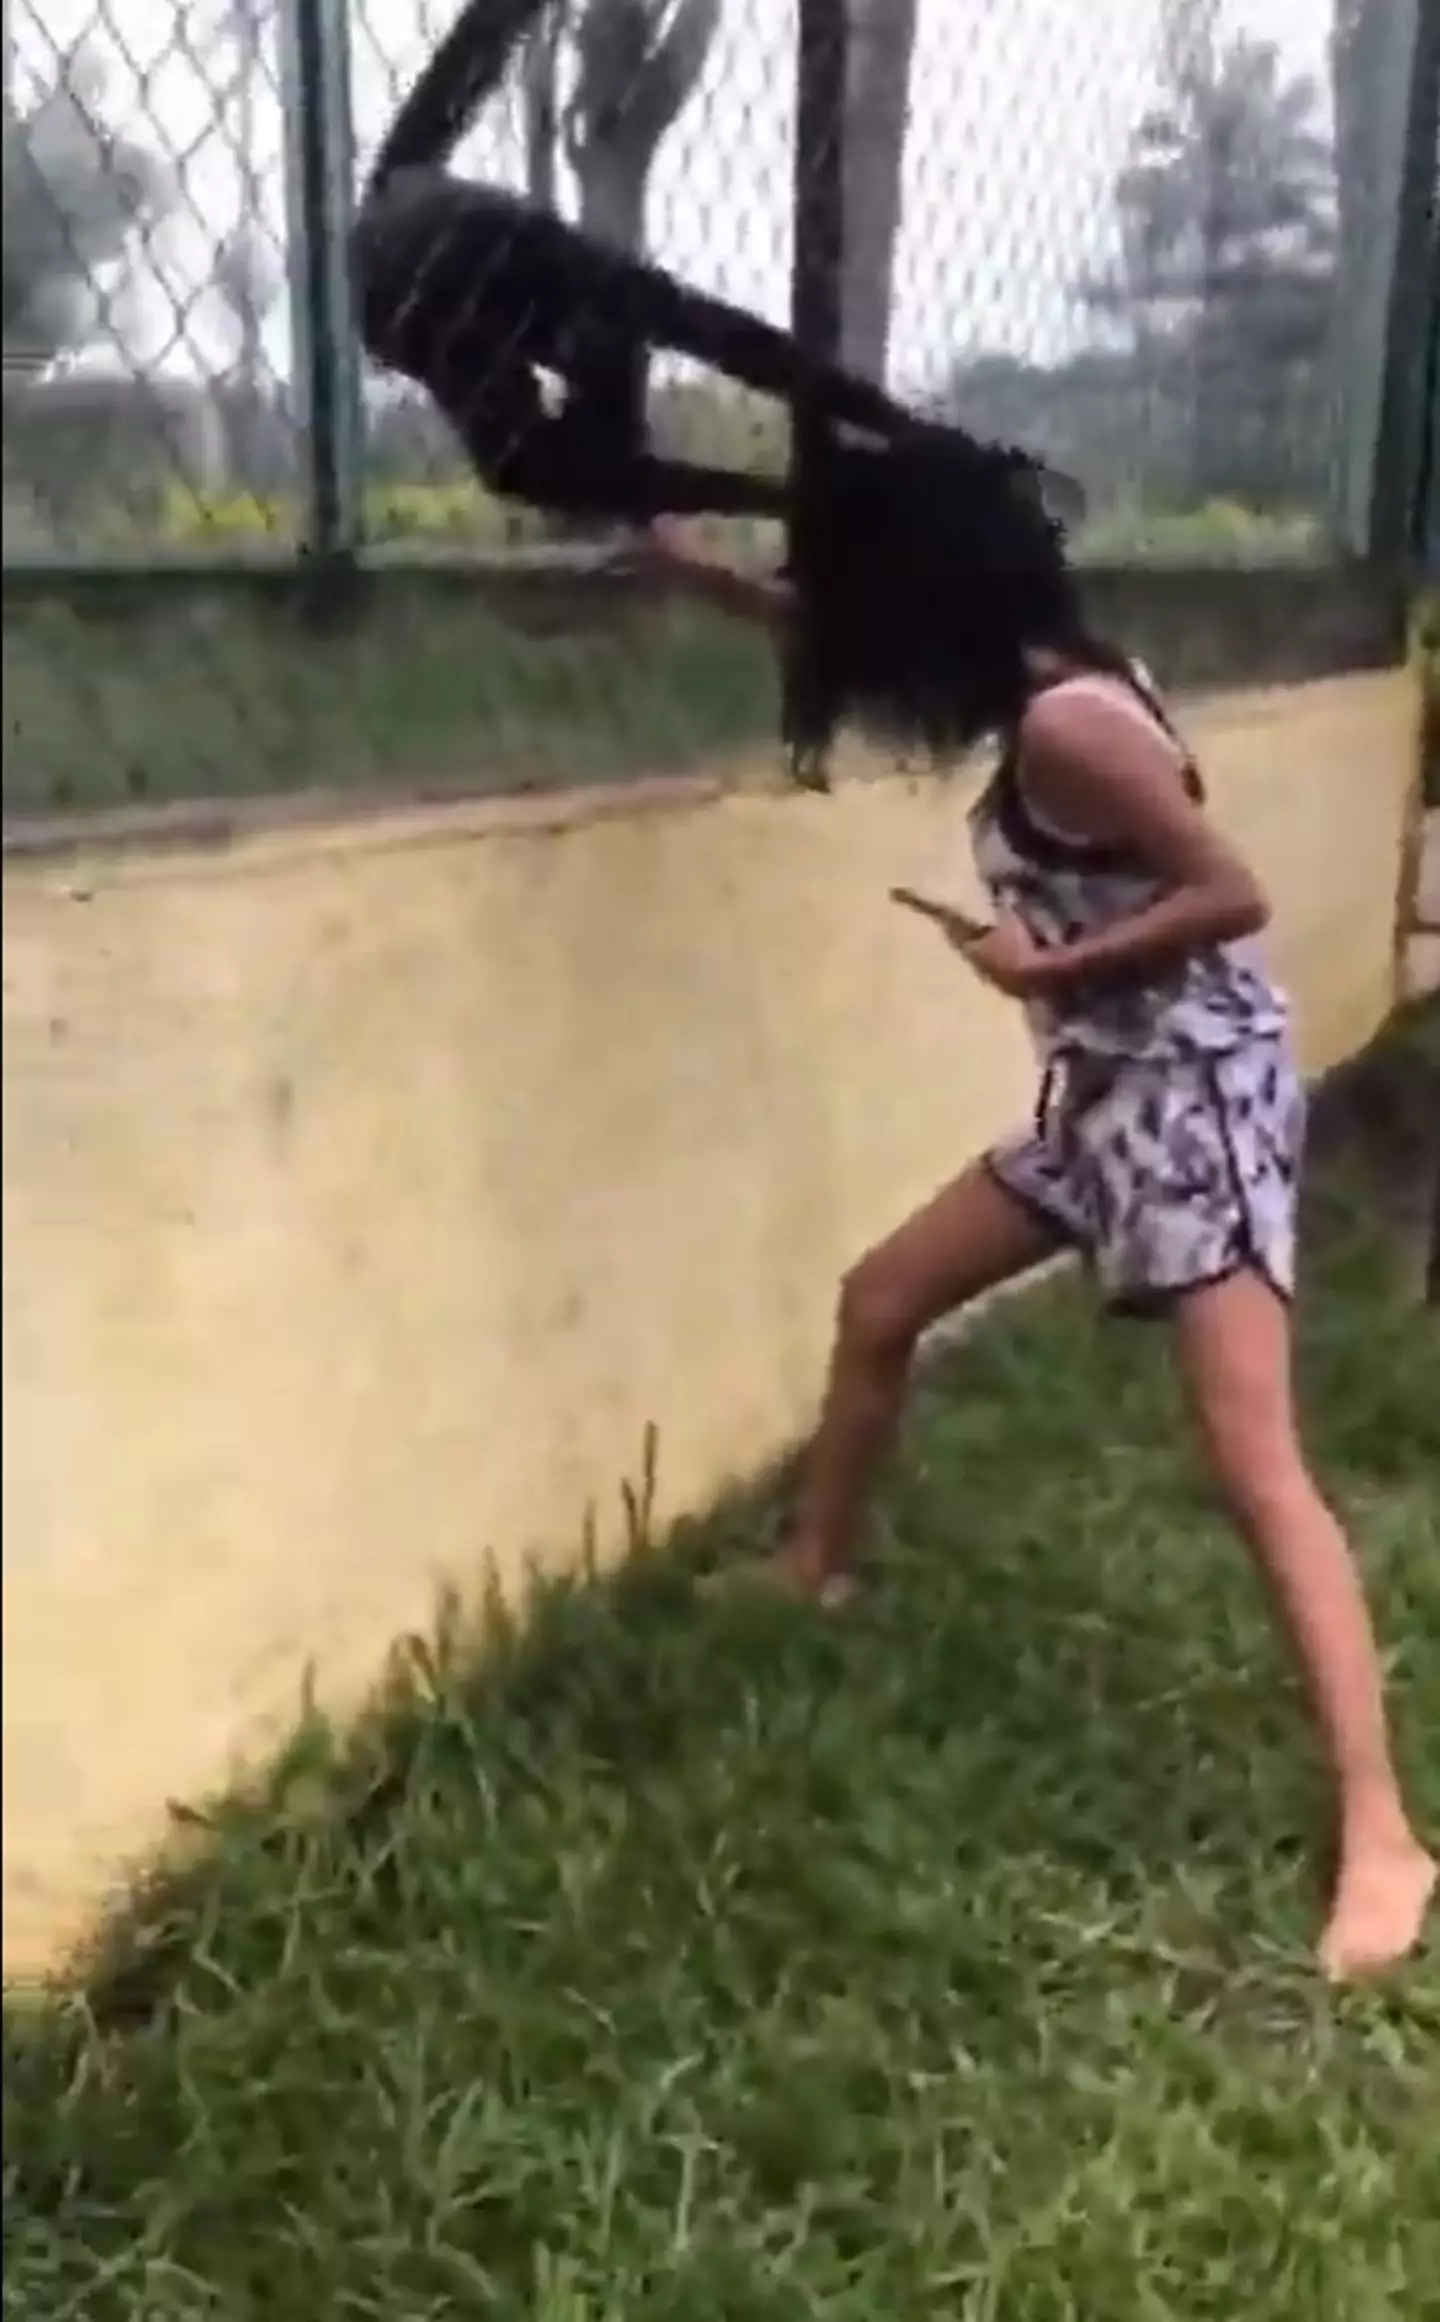 The spider monkeys are able to grab hold of the girl's hair.